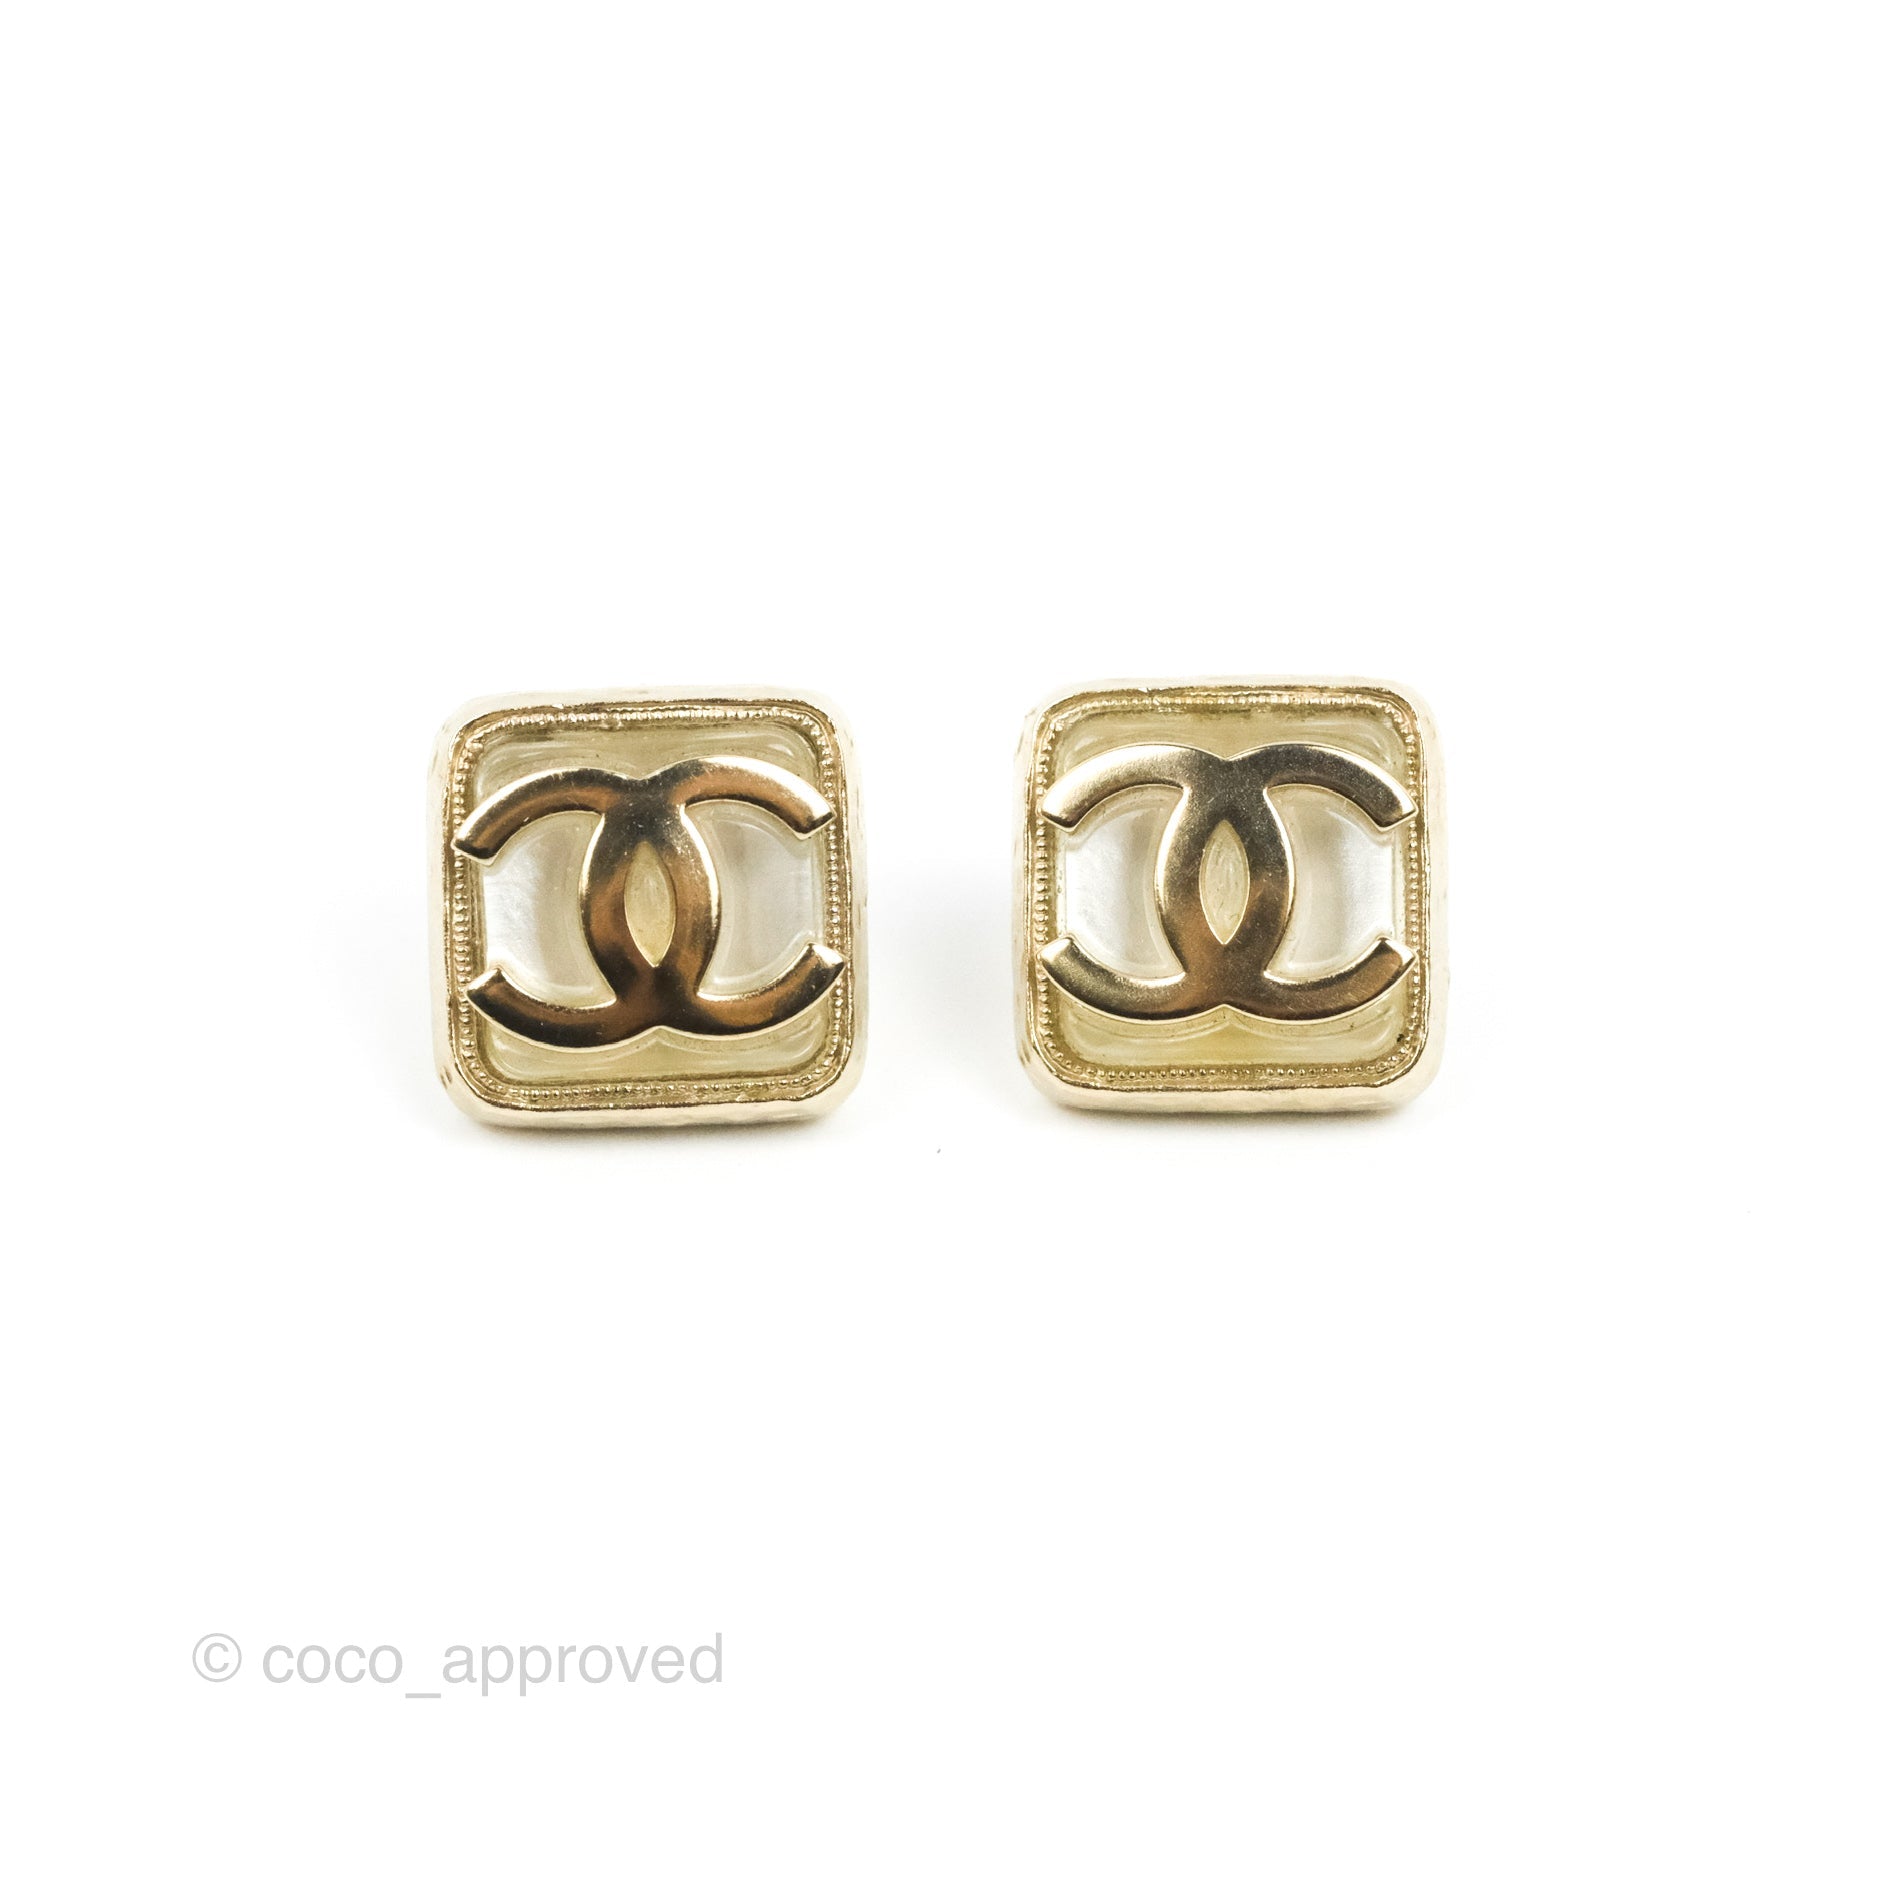 Chanel Black Leather Square CC Earrings Gold Tone 23S – Coco Approved Studio